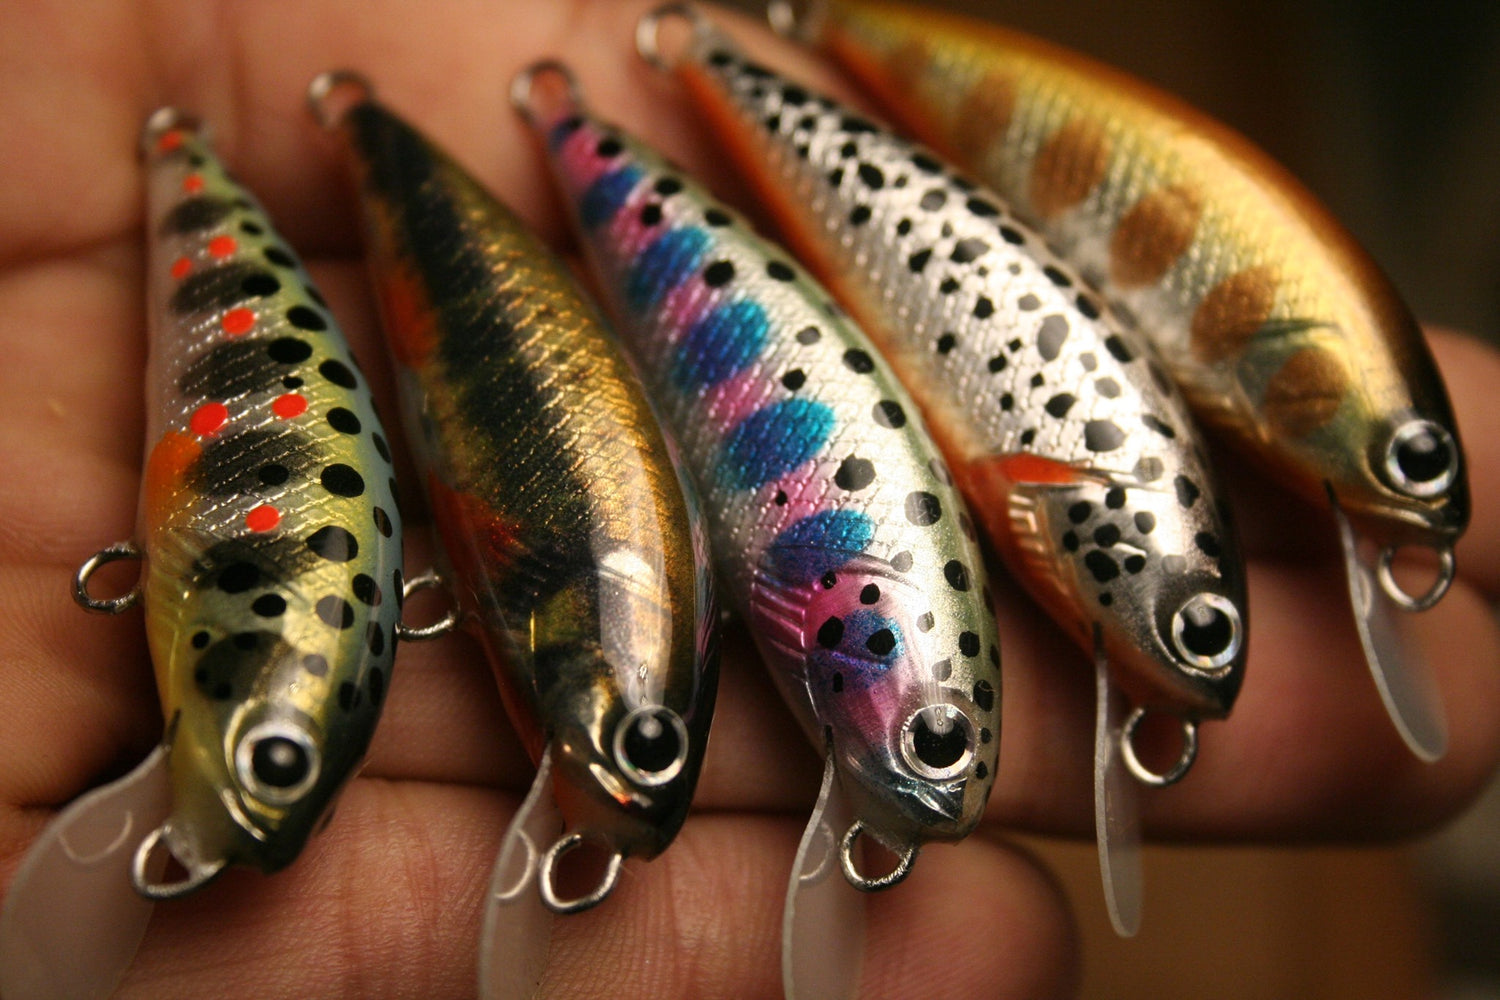 price outlet Trout Lure Set